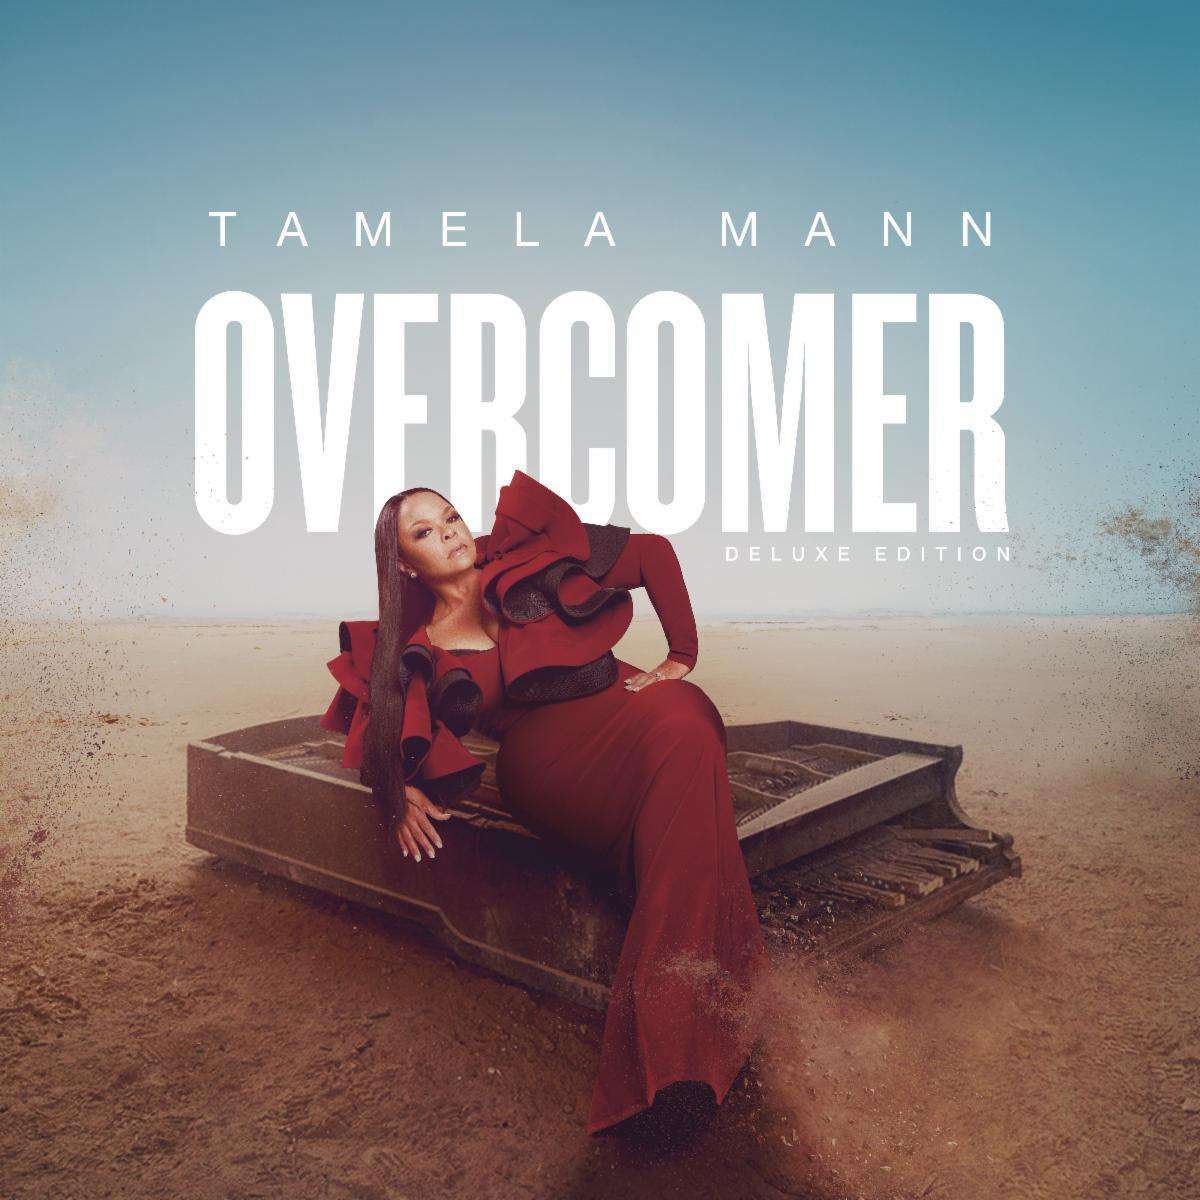 tamela-mann-releases-highly-anticipated-overcomer:-deluxe-edition-available-across-digital-streaming-platforms-today